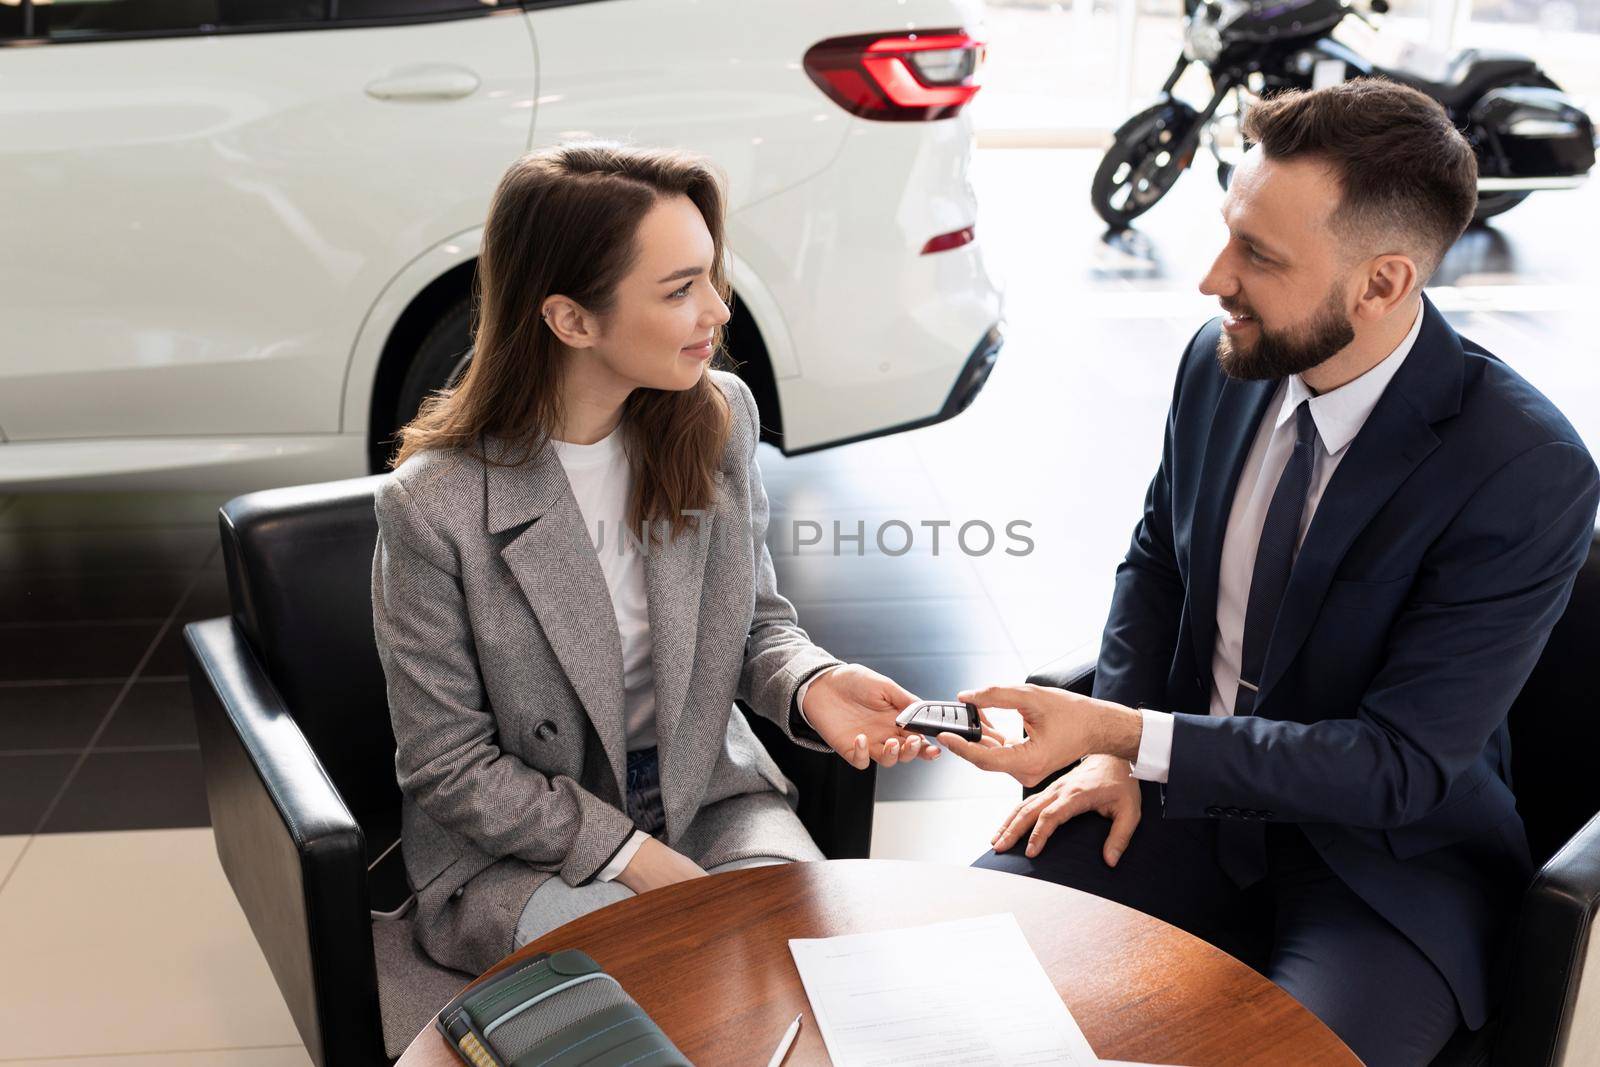 car dealership manager handing over keys to new car buyer. the concept of buying a car on lease by TRMK